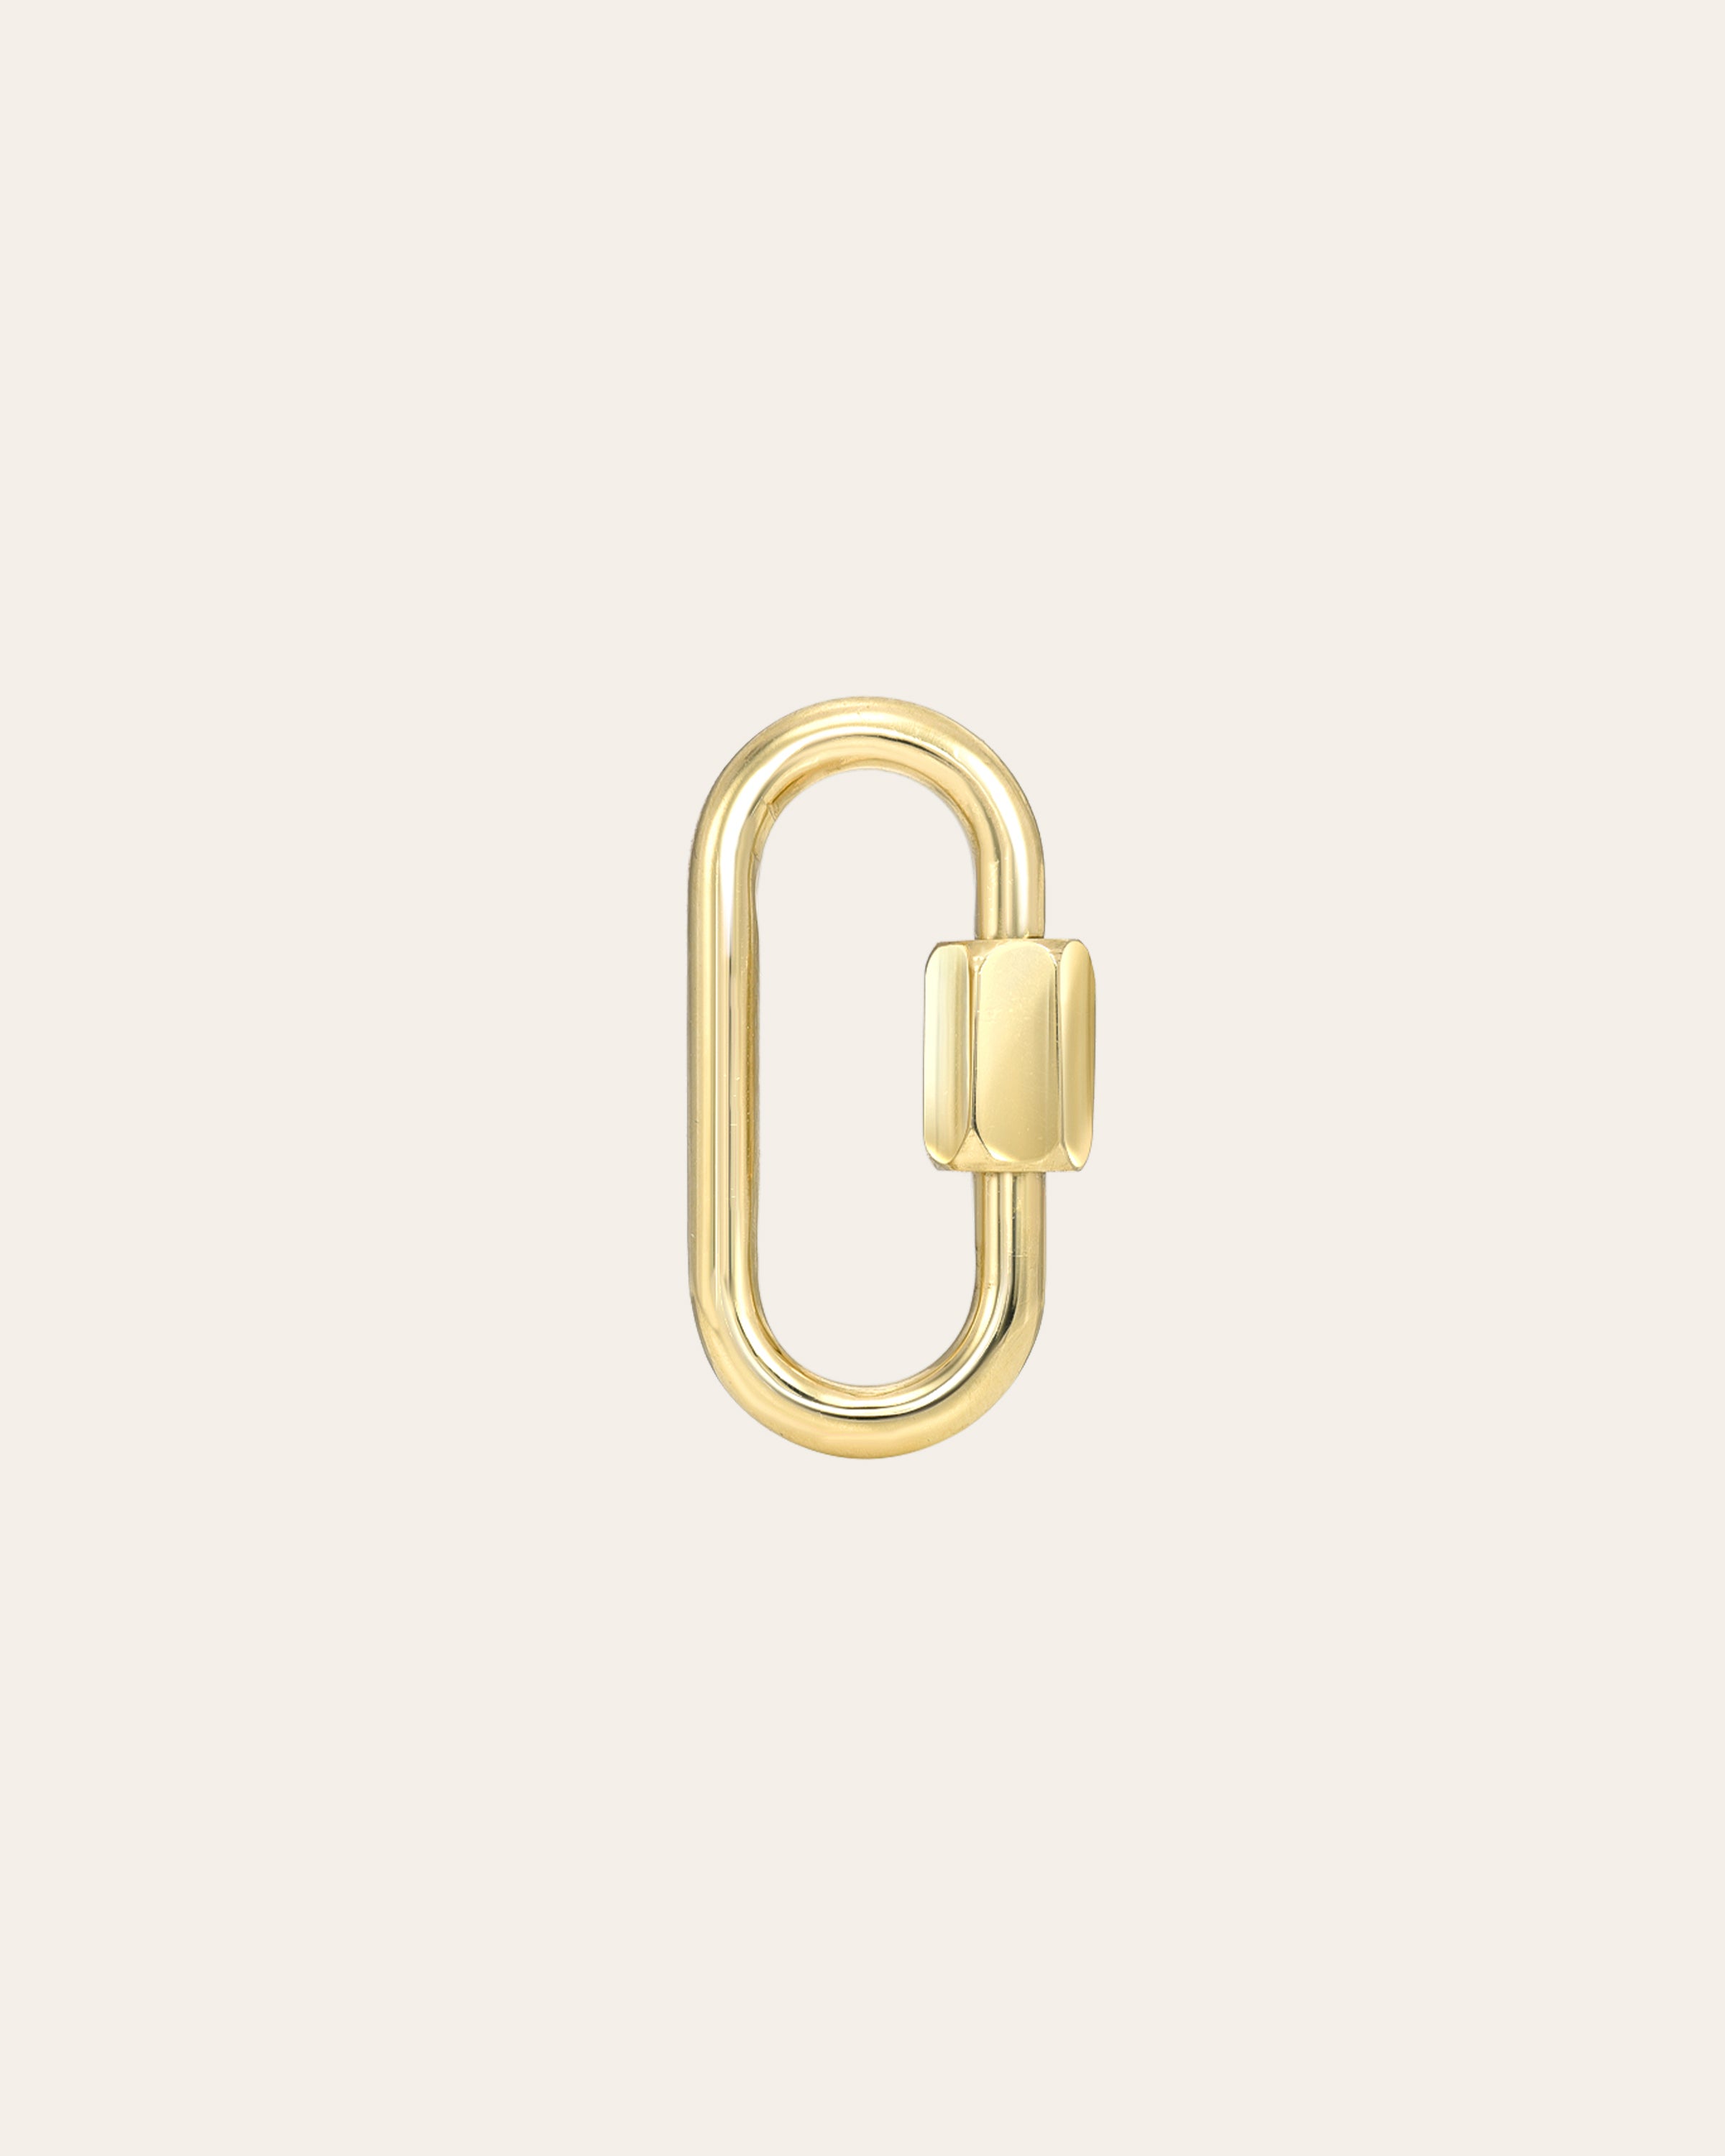  14k Solid Gold Carabiner Lock, Pave Diamond Carabiner Lock,  21mm Carabiner Lock, Carabiner Lock Jewelry, Screw Carabiner Lock Jewelry  (Yellow Gold) : Handmade Products